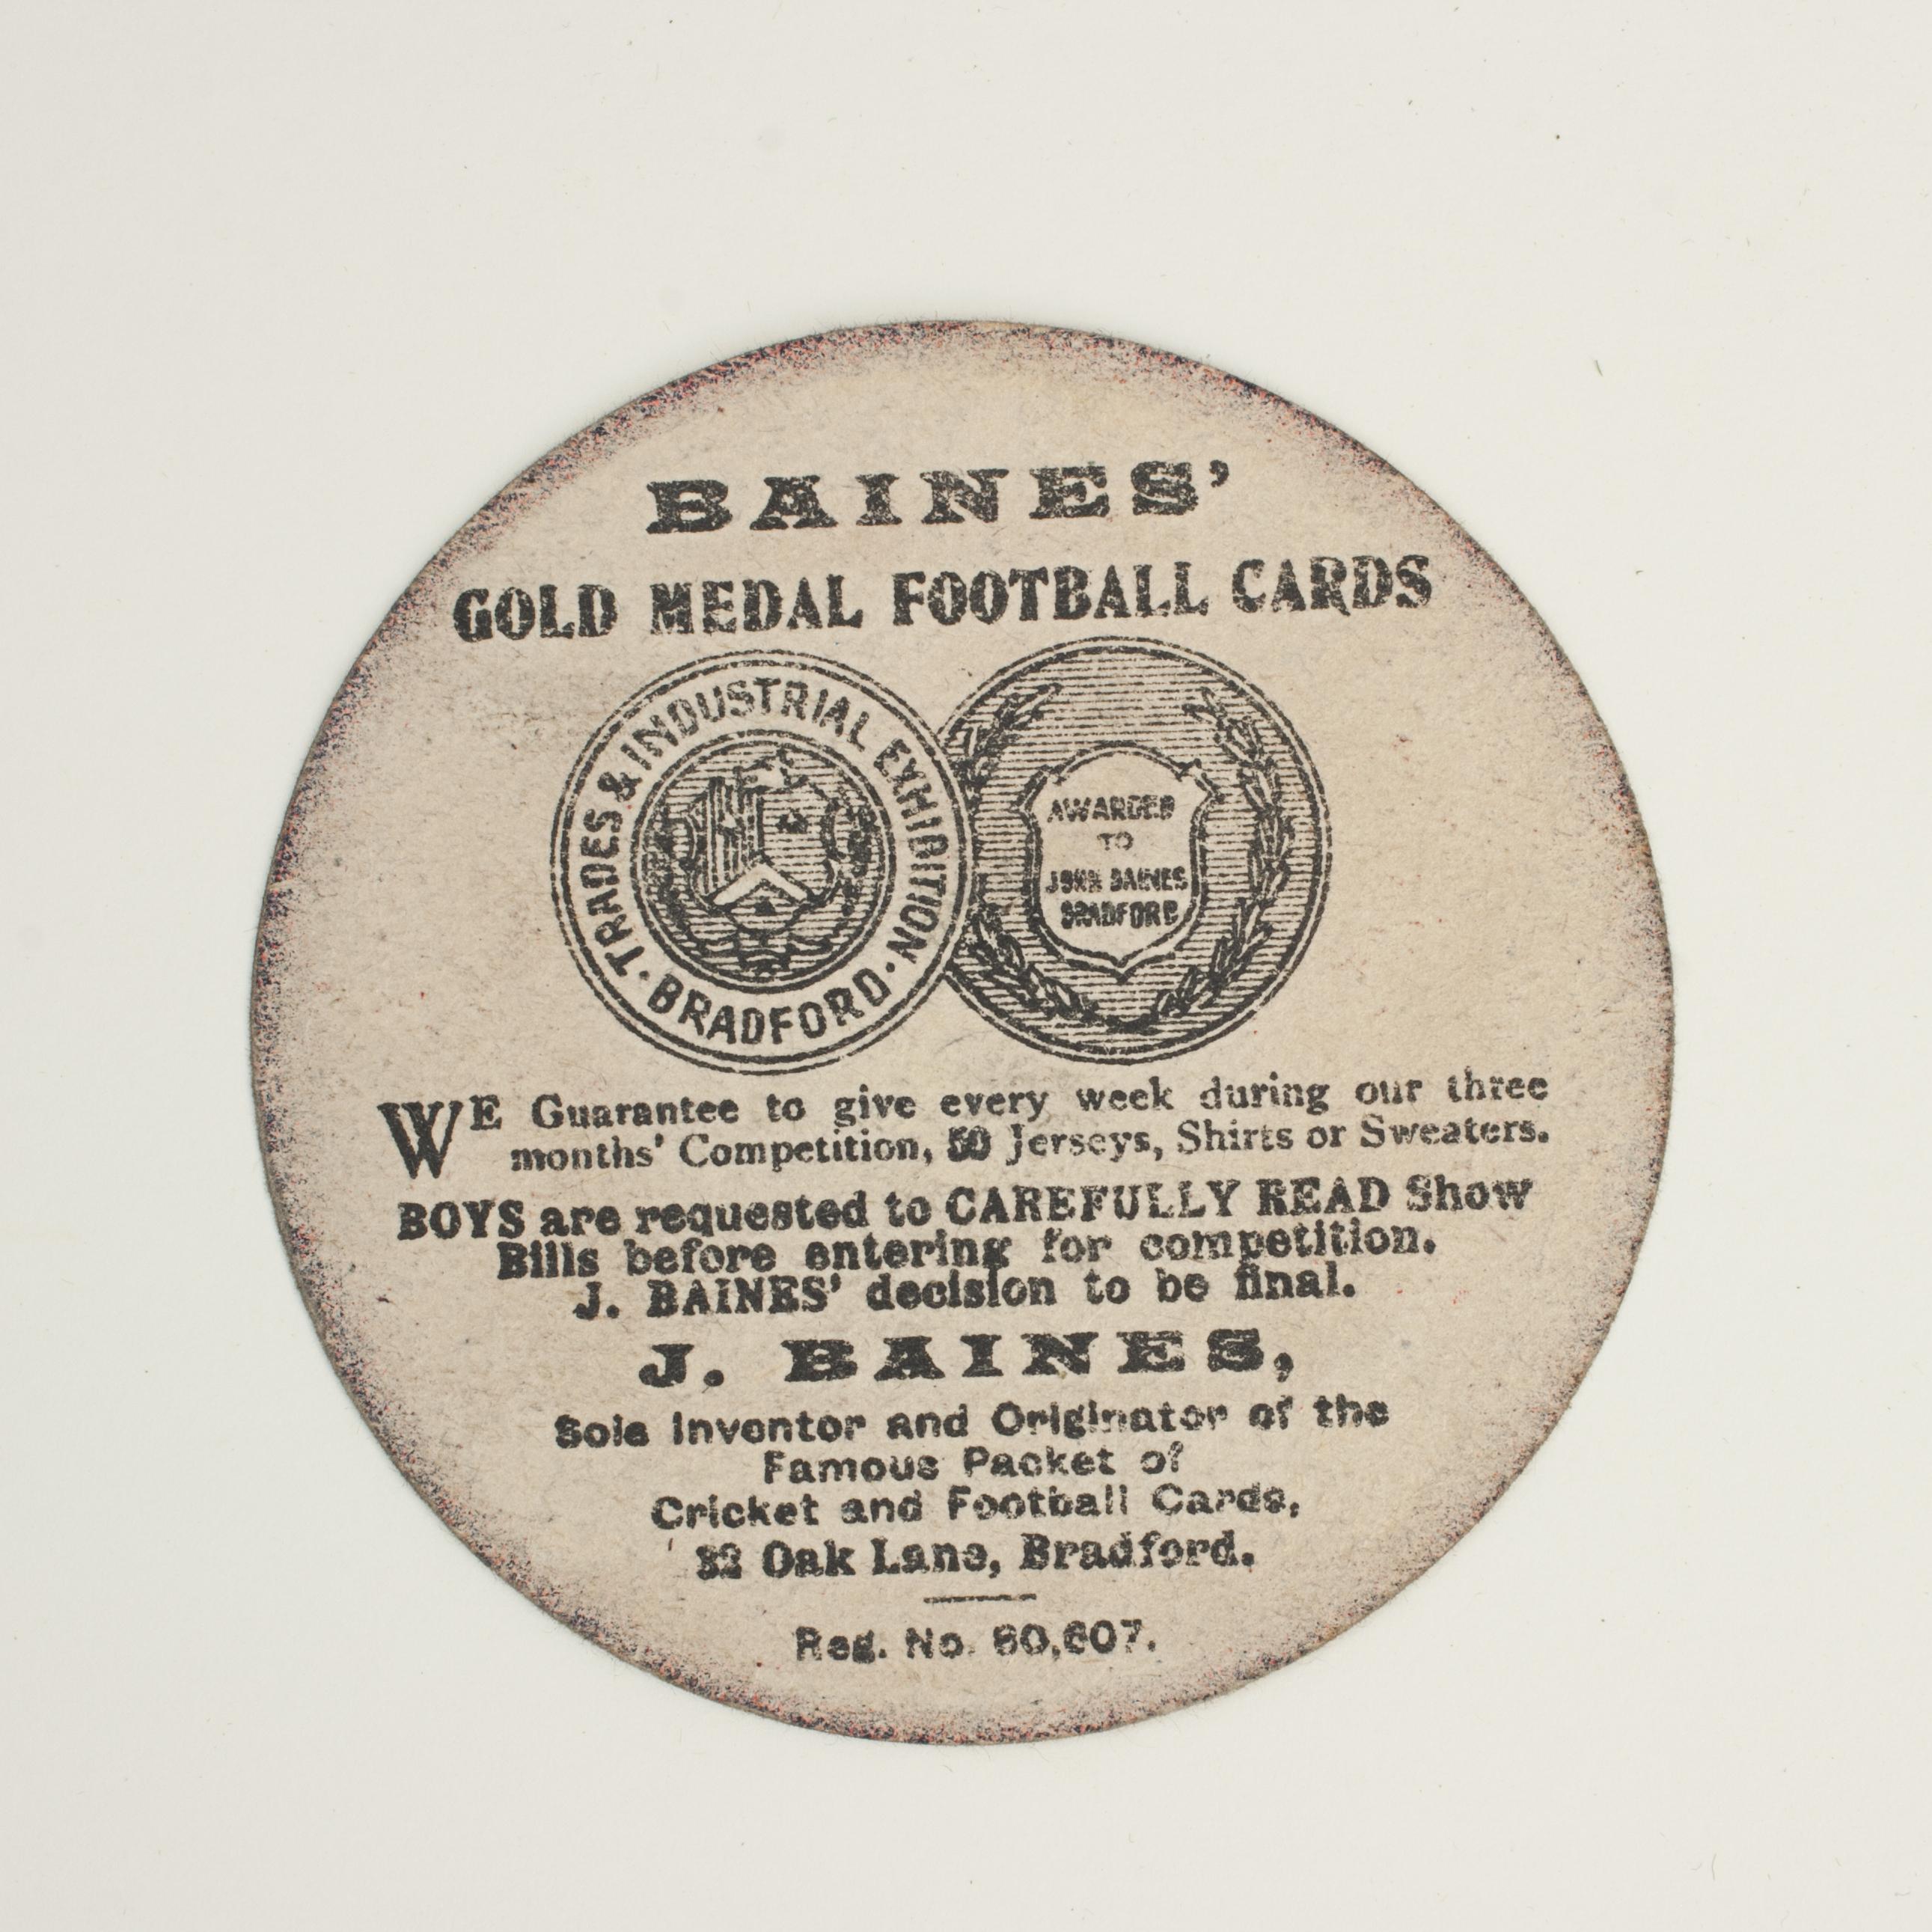 Baines football trade card, yeadon green lane. Well played.
A rare circular football trade card in the shape of a leather football ball. Made by the toy shop owner from Bradford, John Baines. Baines went on to produce not only football cards but